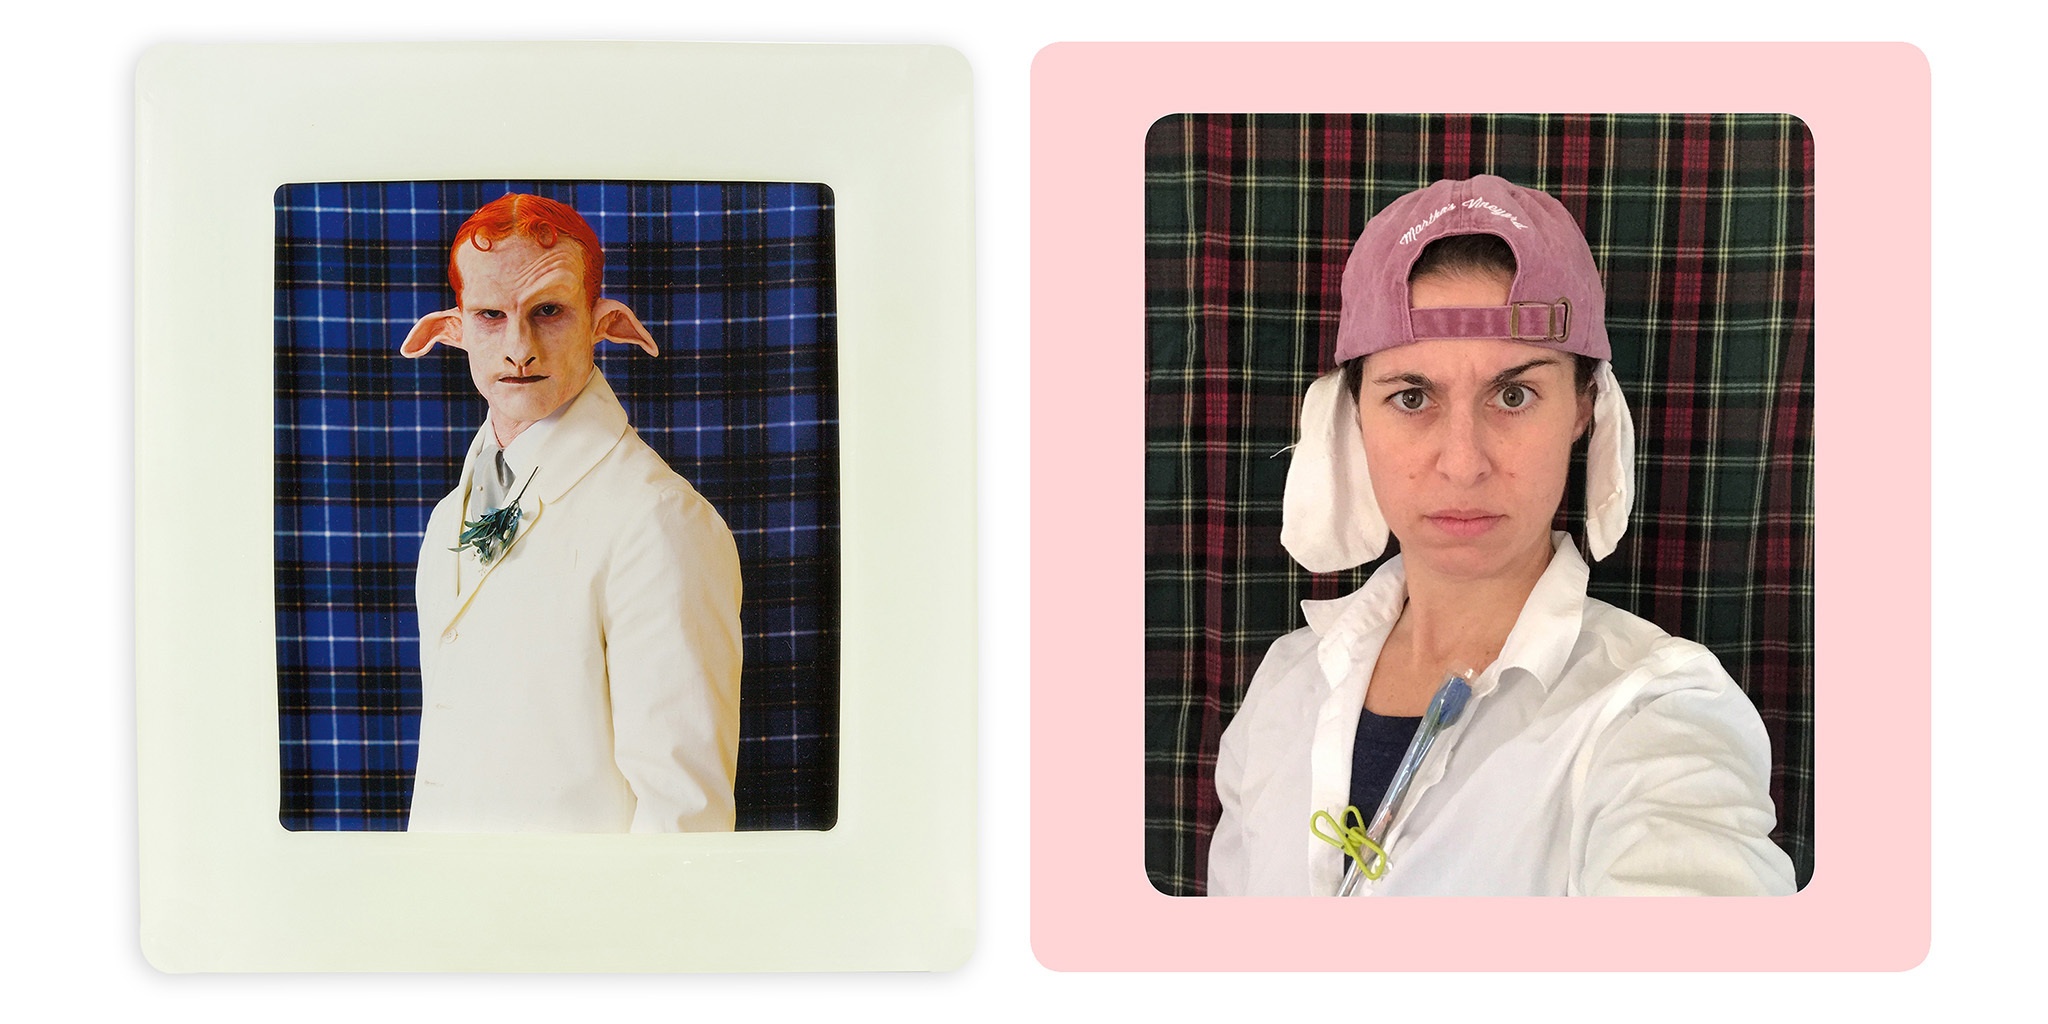 [Matthew Barney's _CREMASTER 4: The Loughton Candidate_, 1994, color photograph on artist-made cast-plastic frame, 13 5/8 x 11 5/8 inches, Gift of Peter Norton, 2014.7.2](https://tang.skidmore.edu/collection/artworks/167-cremaster-4-the-loughton-candidate) re-created by Skidmore staff member Martha O'Leary